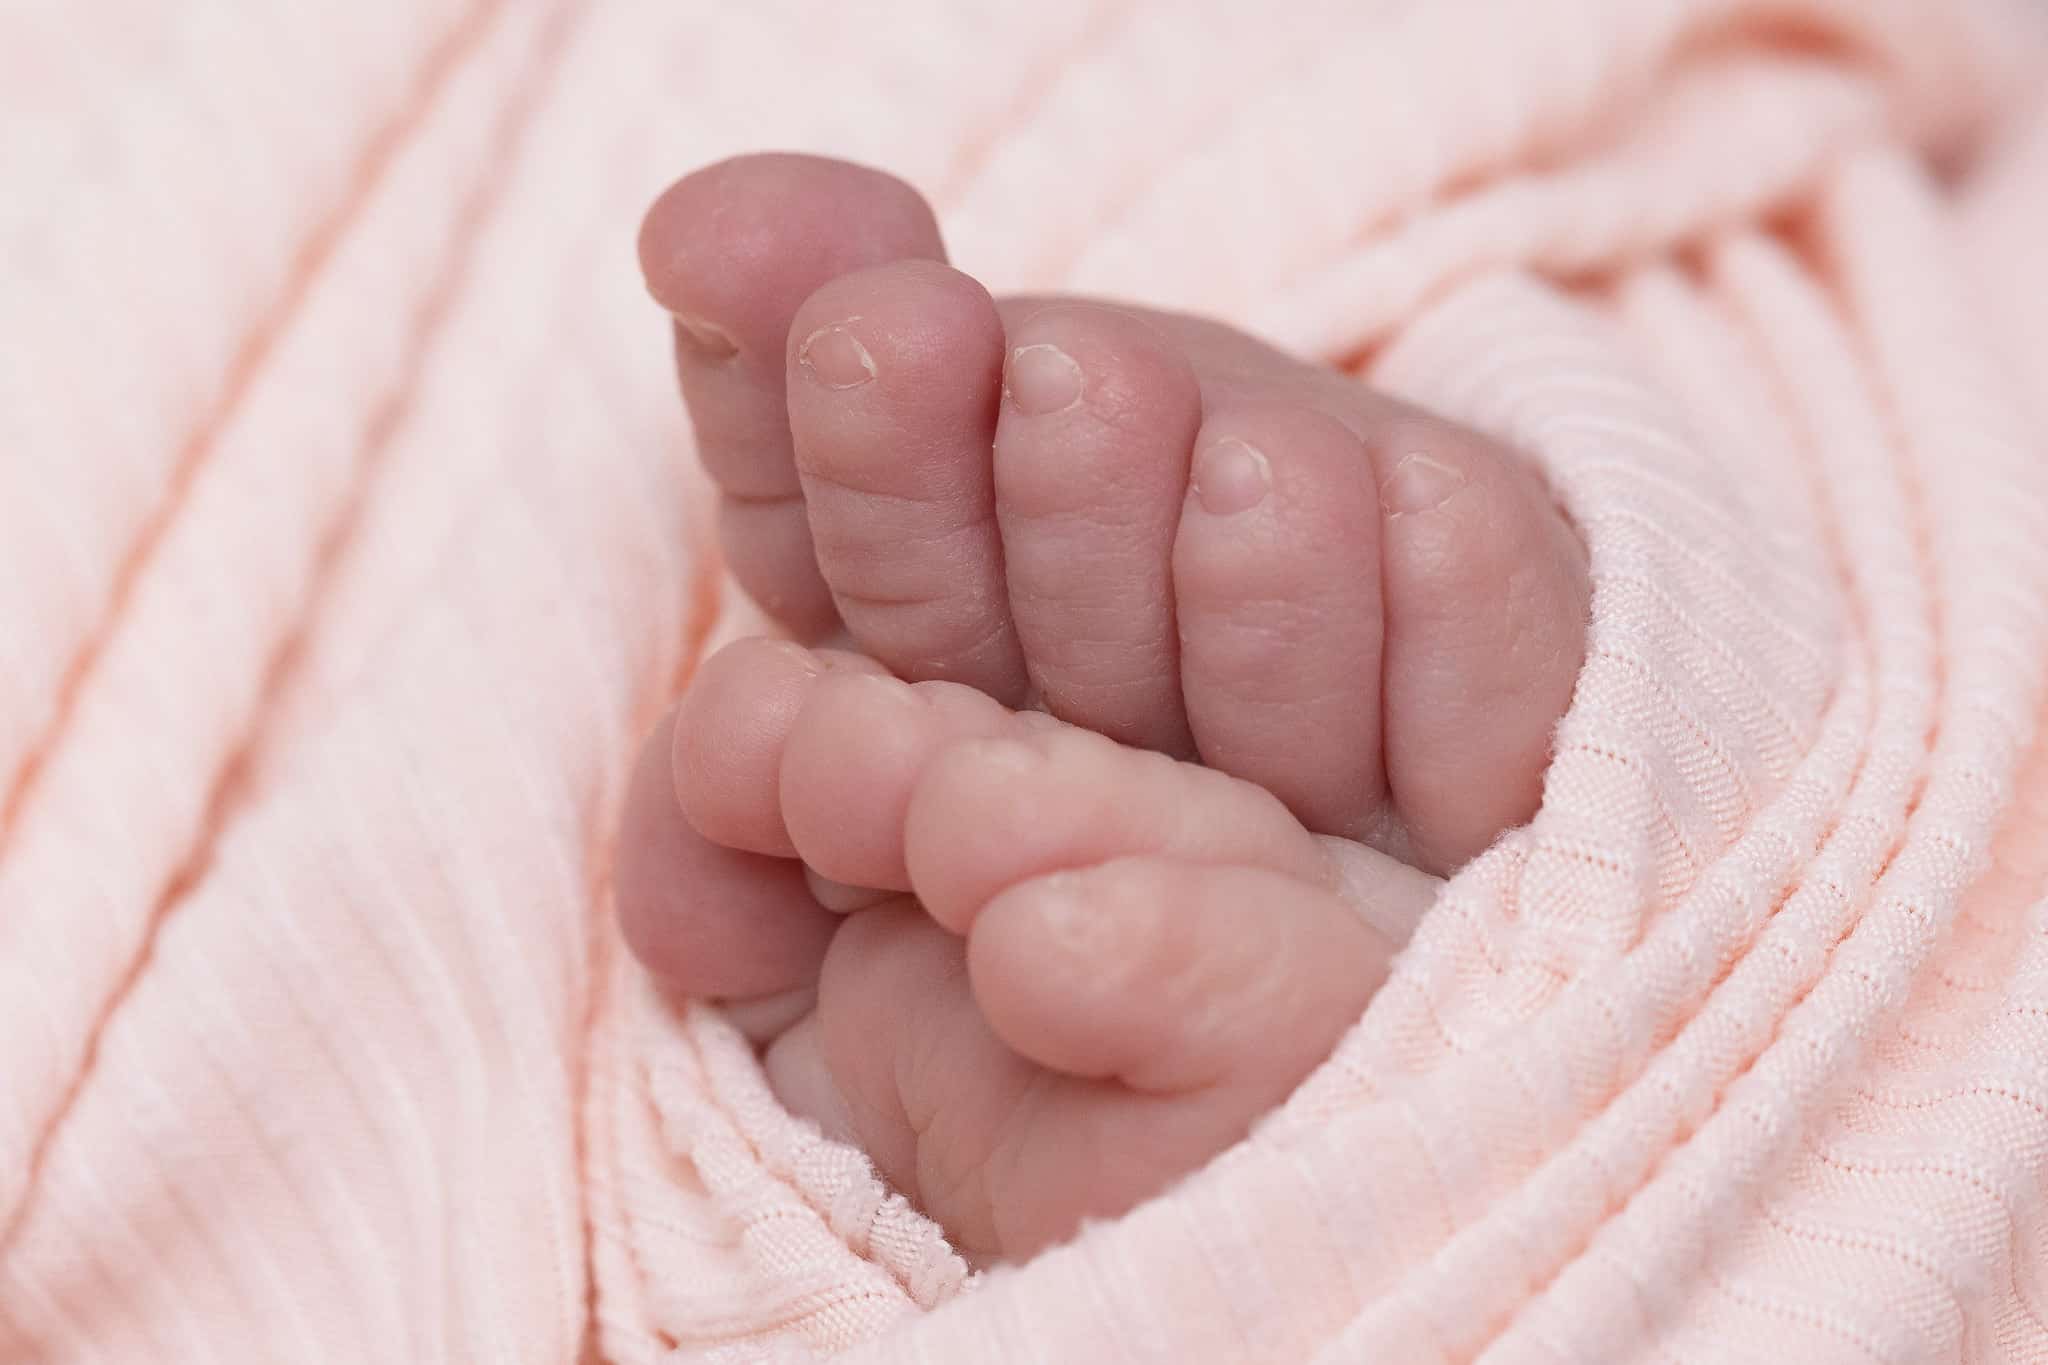 A close-up of a baby girl's toes wrapped in a pink swaddle.